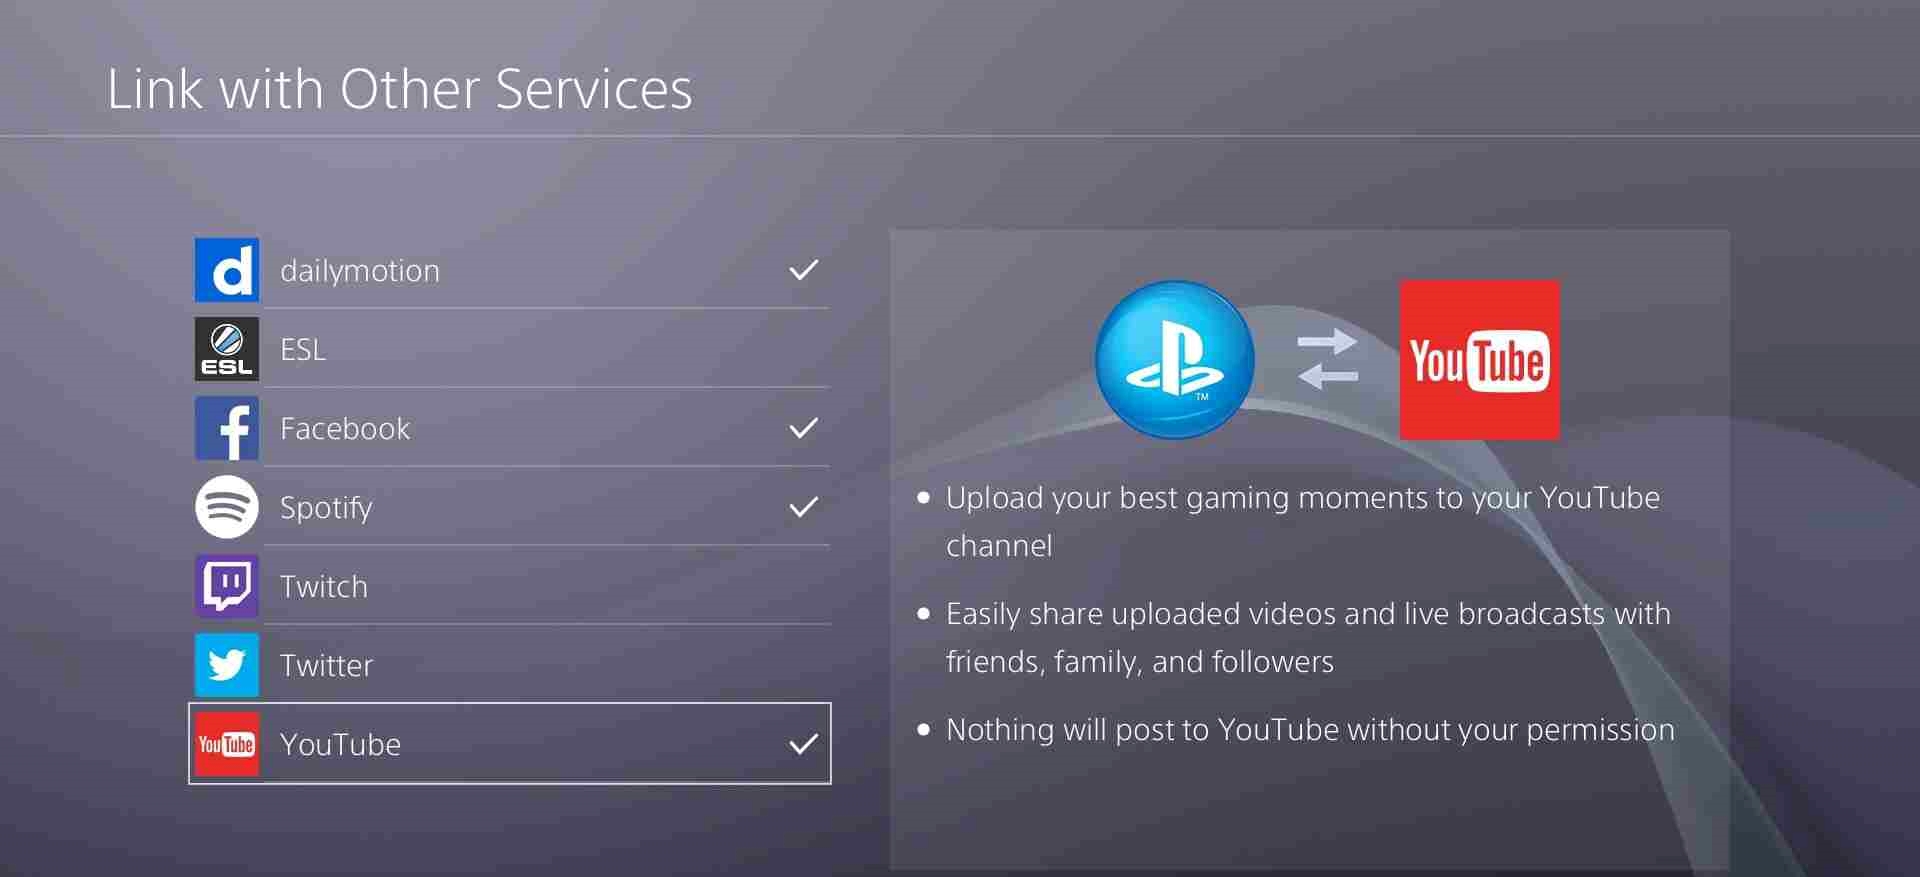 Link YouTube with PS4 to stream